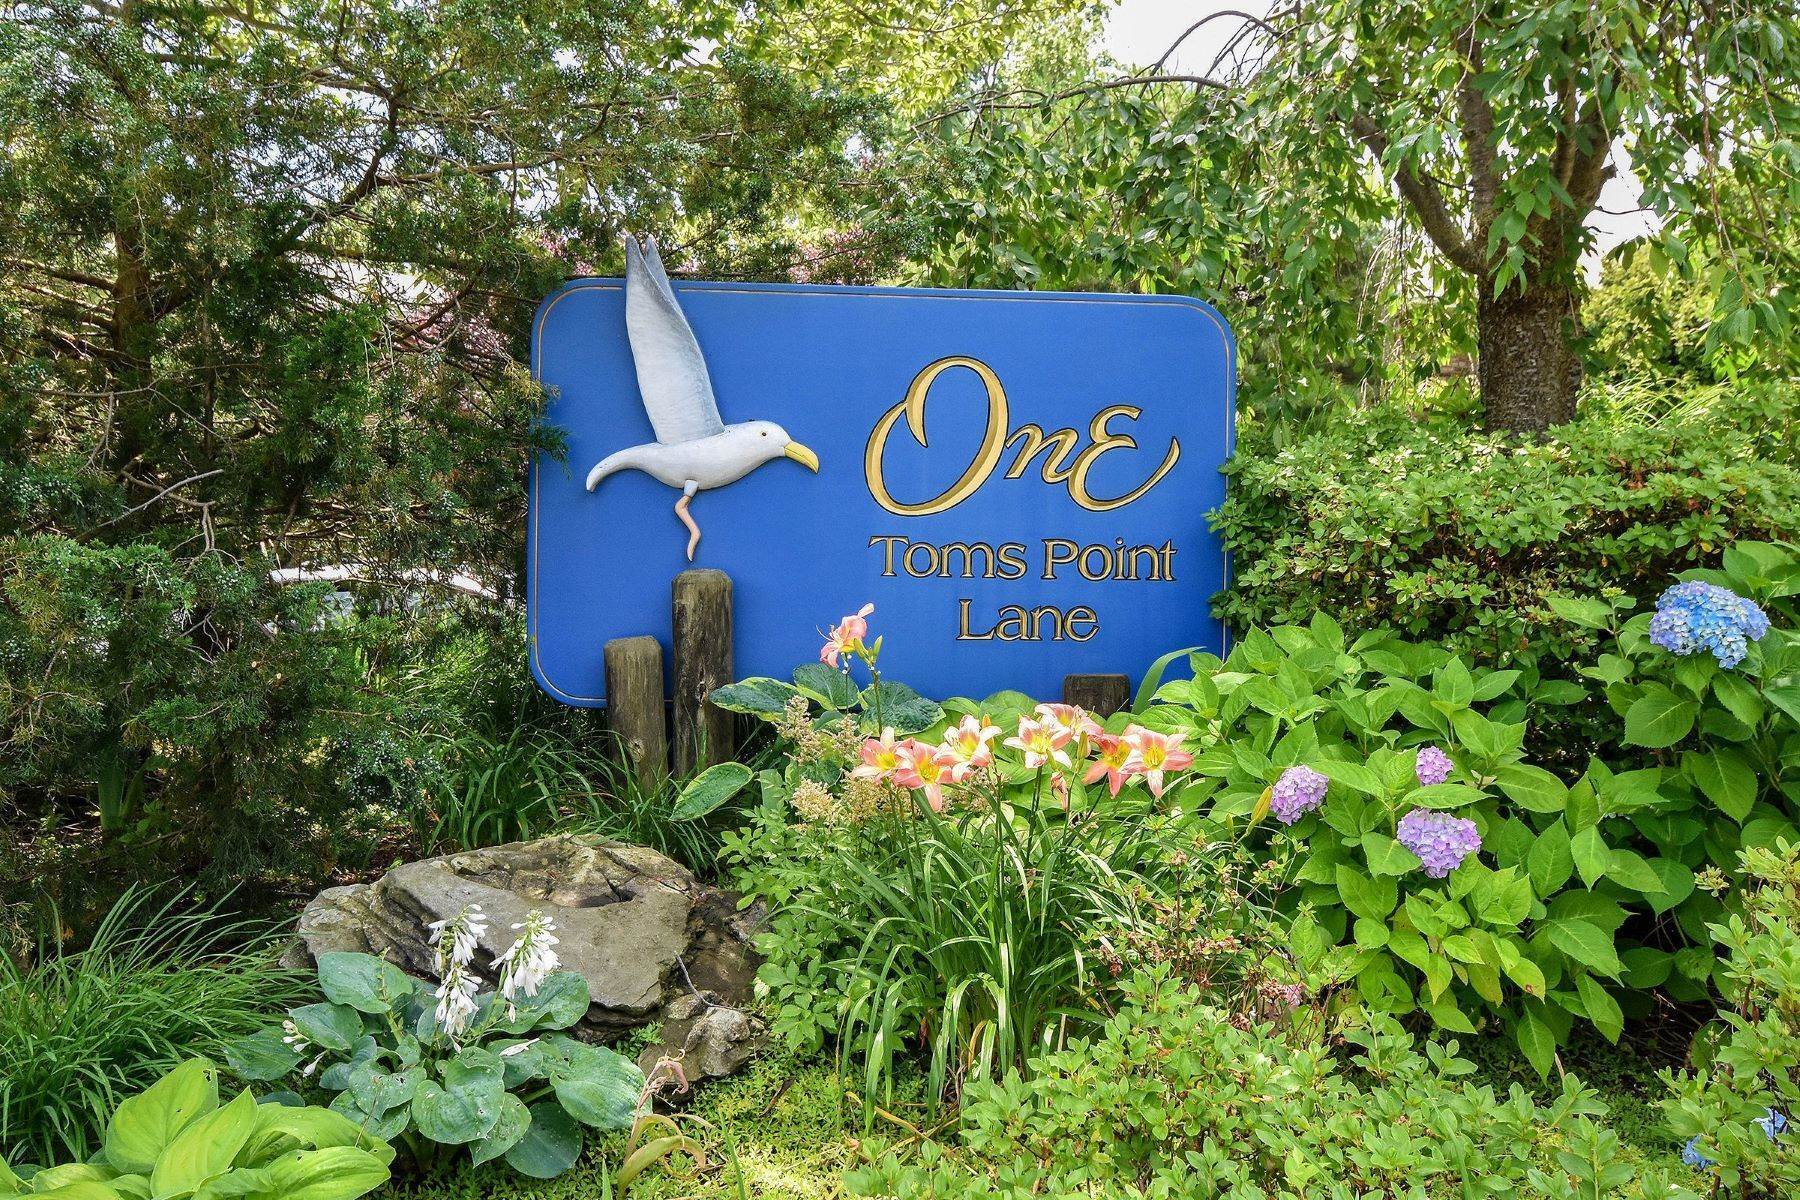 Co-op Properties for Sale at 1 Toms Point Lane, B2 #4G, Port Washington, NY 11050 1 Toms Point Lane , B2 #4G Port Washington, New York 11050 United States